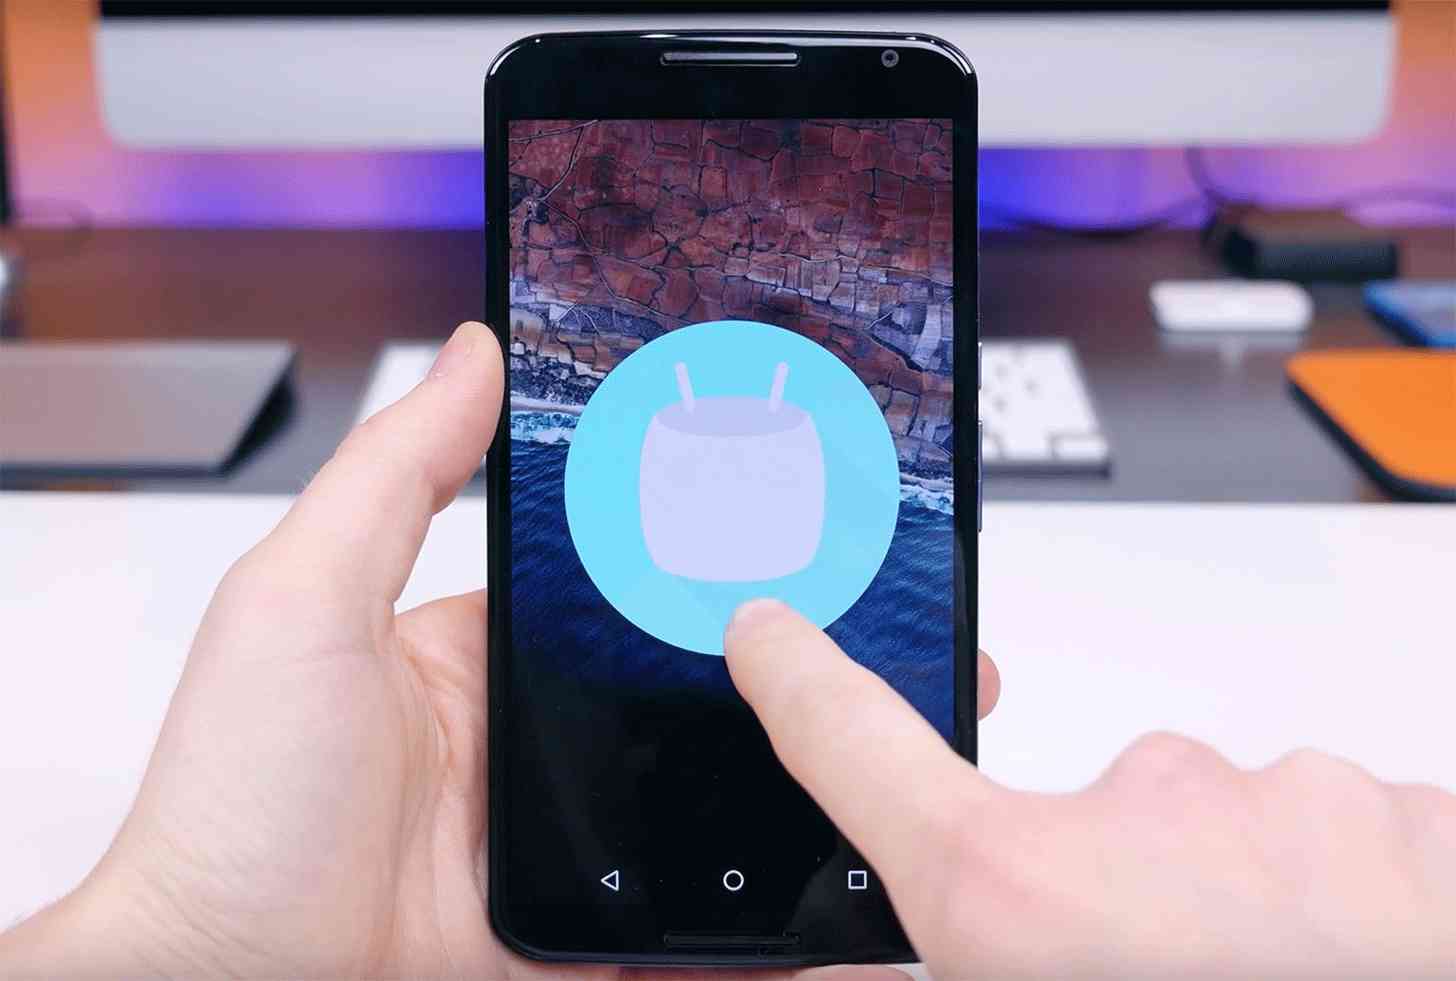 Android 6.0 Marshmallow Easter egg